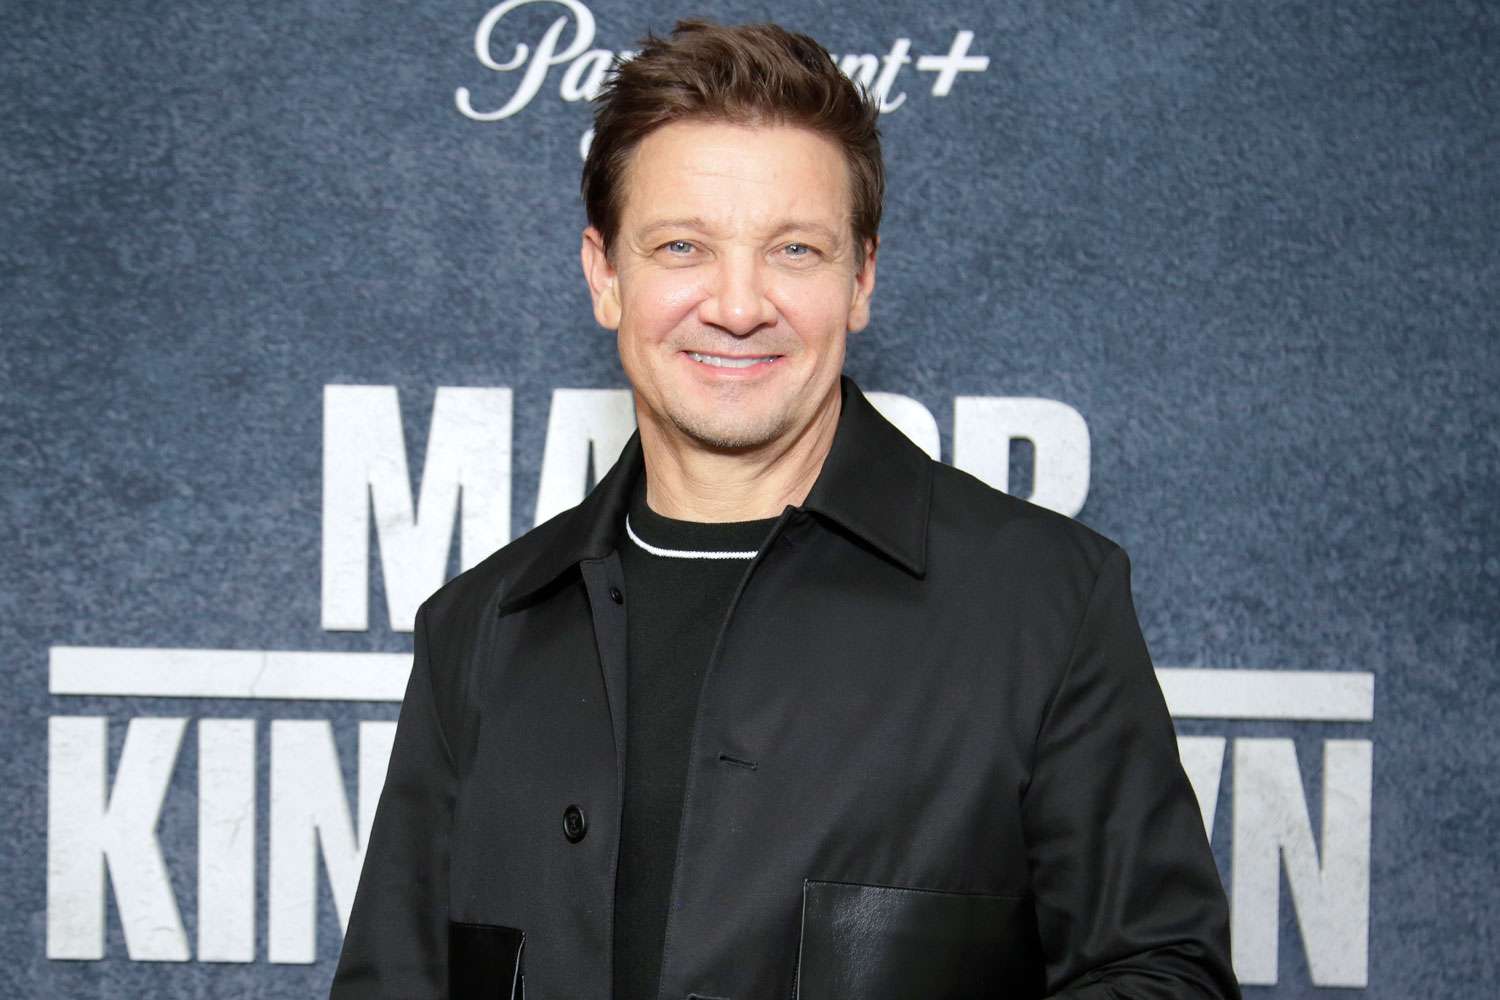 Jeremy Renner Says He's 'Accepted' That He'll Be in 'Recovery' for 'the Rest of My Life' (Exclusive)